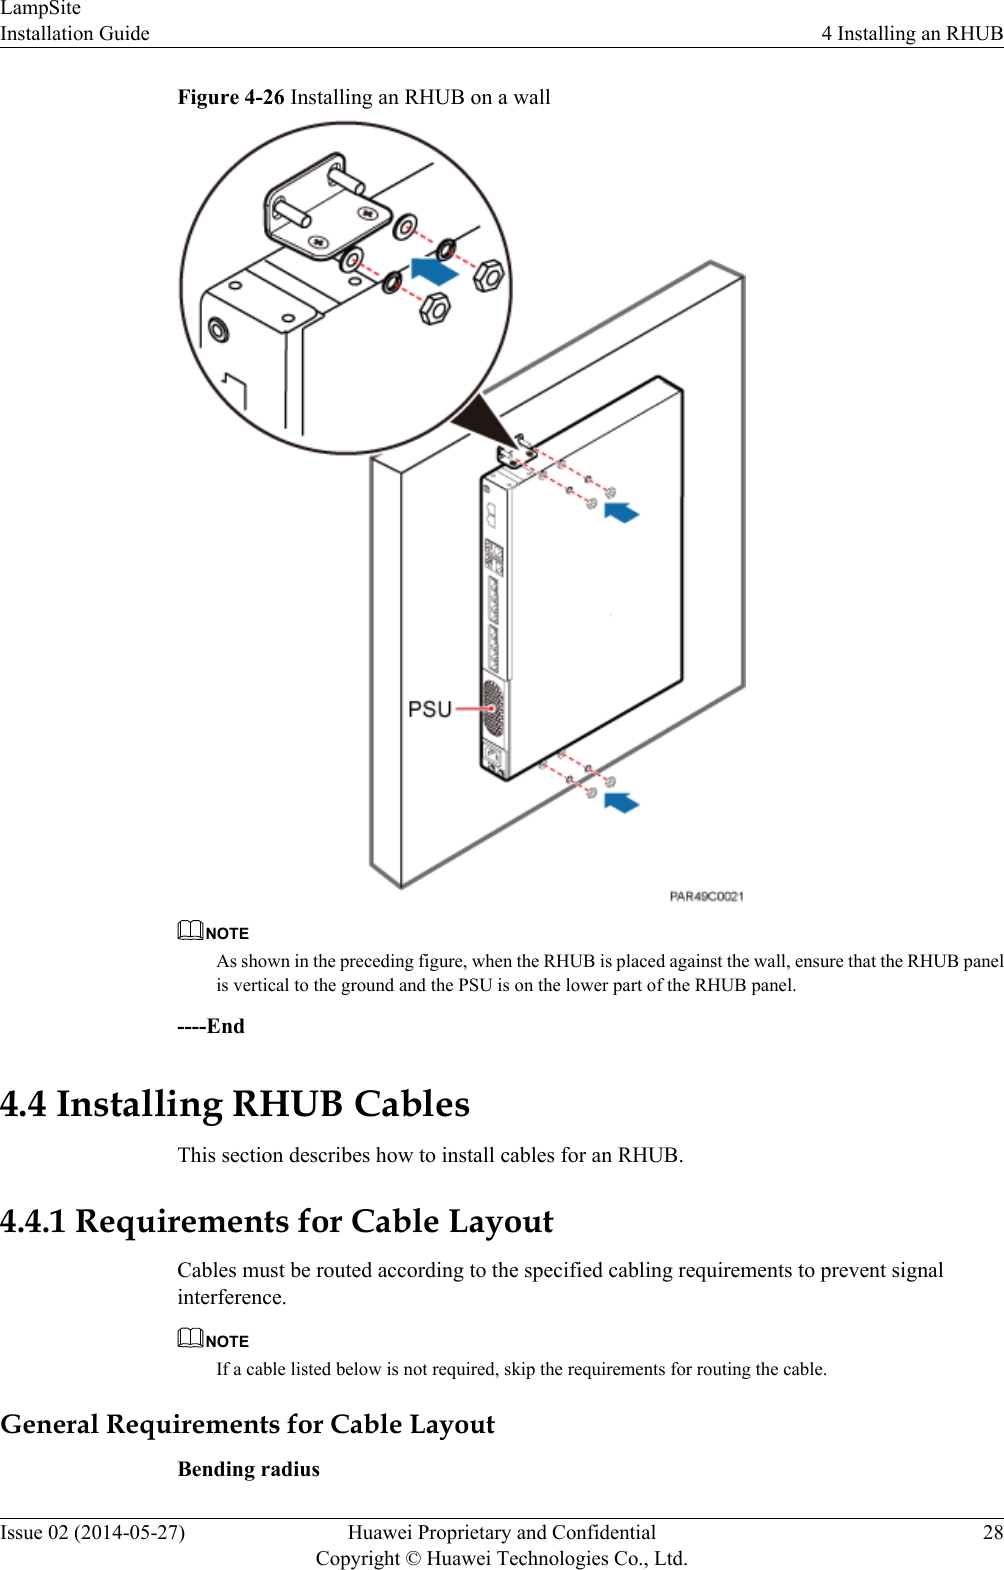 Figure 4-26 Installing an RHUB on a wallNOTEAs shown in the preceding figure, when the RHUB is placed against the wall, ensure that the RHUB panelis vertical to the ground and the PSU is on the lower part of the RHUB panel.----End4.4 Installing RHUB CablesThis section describes how to install cables for an RHUB.4.4.1 Requirements for Cable LayoutCables must be routed according to the specified cabling requirements to prevent signalinterference.NOTEIf a cable listed below is not required, skip the requirements for routing the cable.General Requirements for Cable LayoutBending radiusLampSiteInstallation Guide 4 Installing an RHUBIssue 02 (2014-05-27) Huawei Proprietary and ConfidentialCopyright © Huawei Technologies Co., Ltd.28